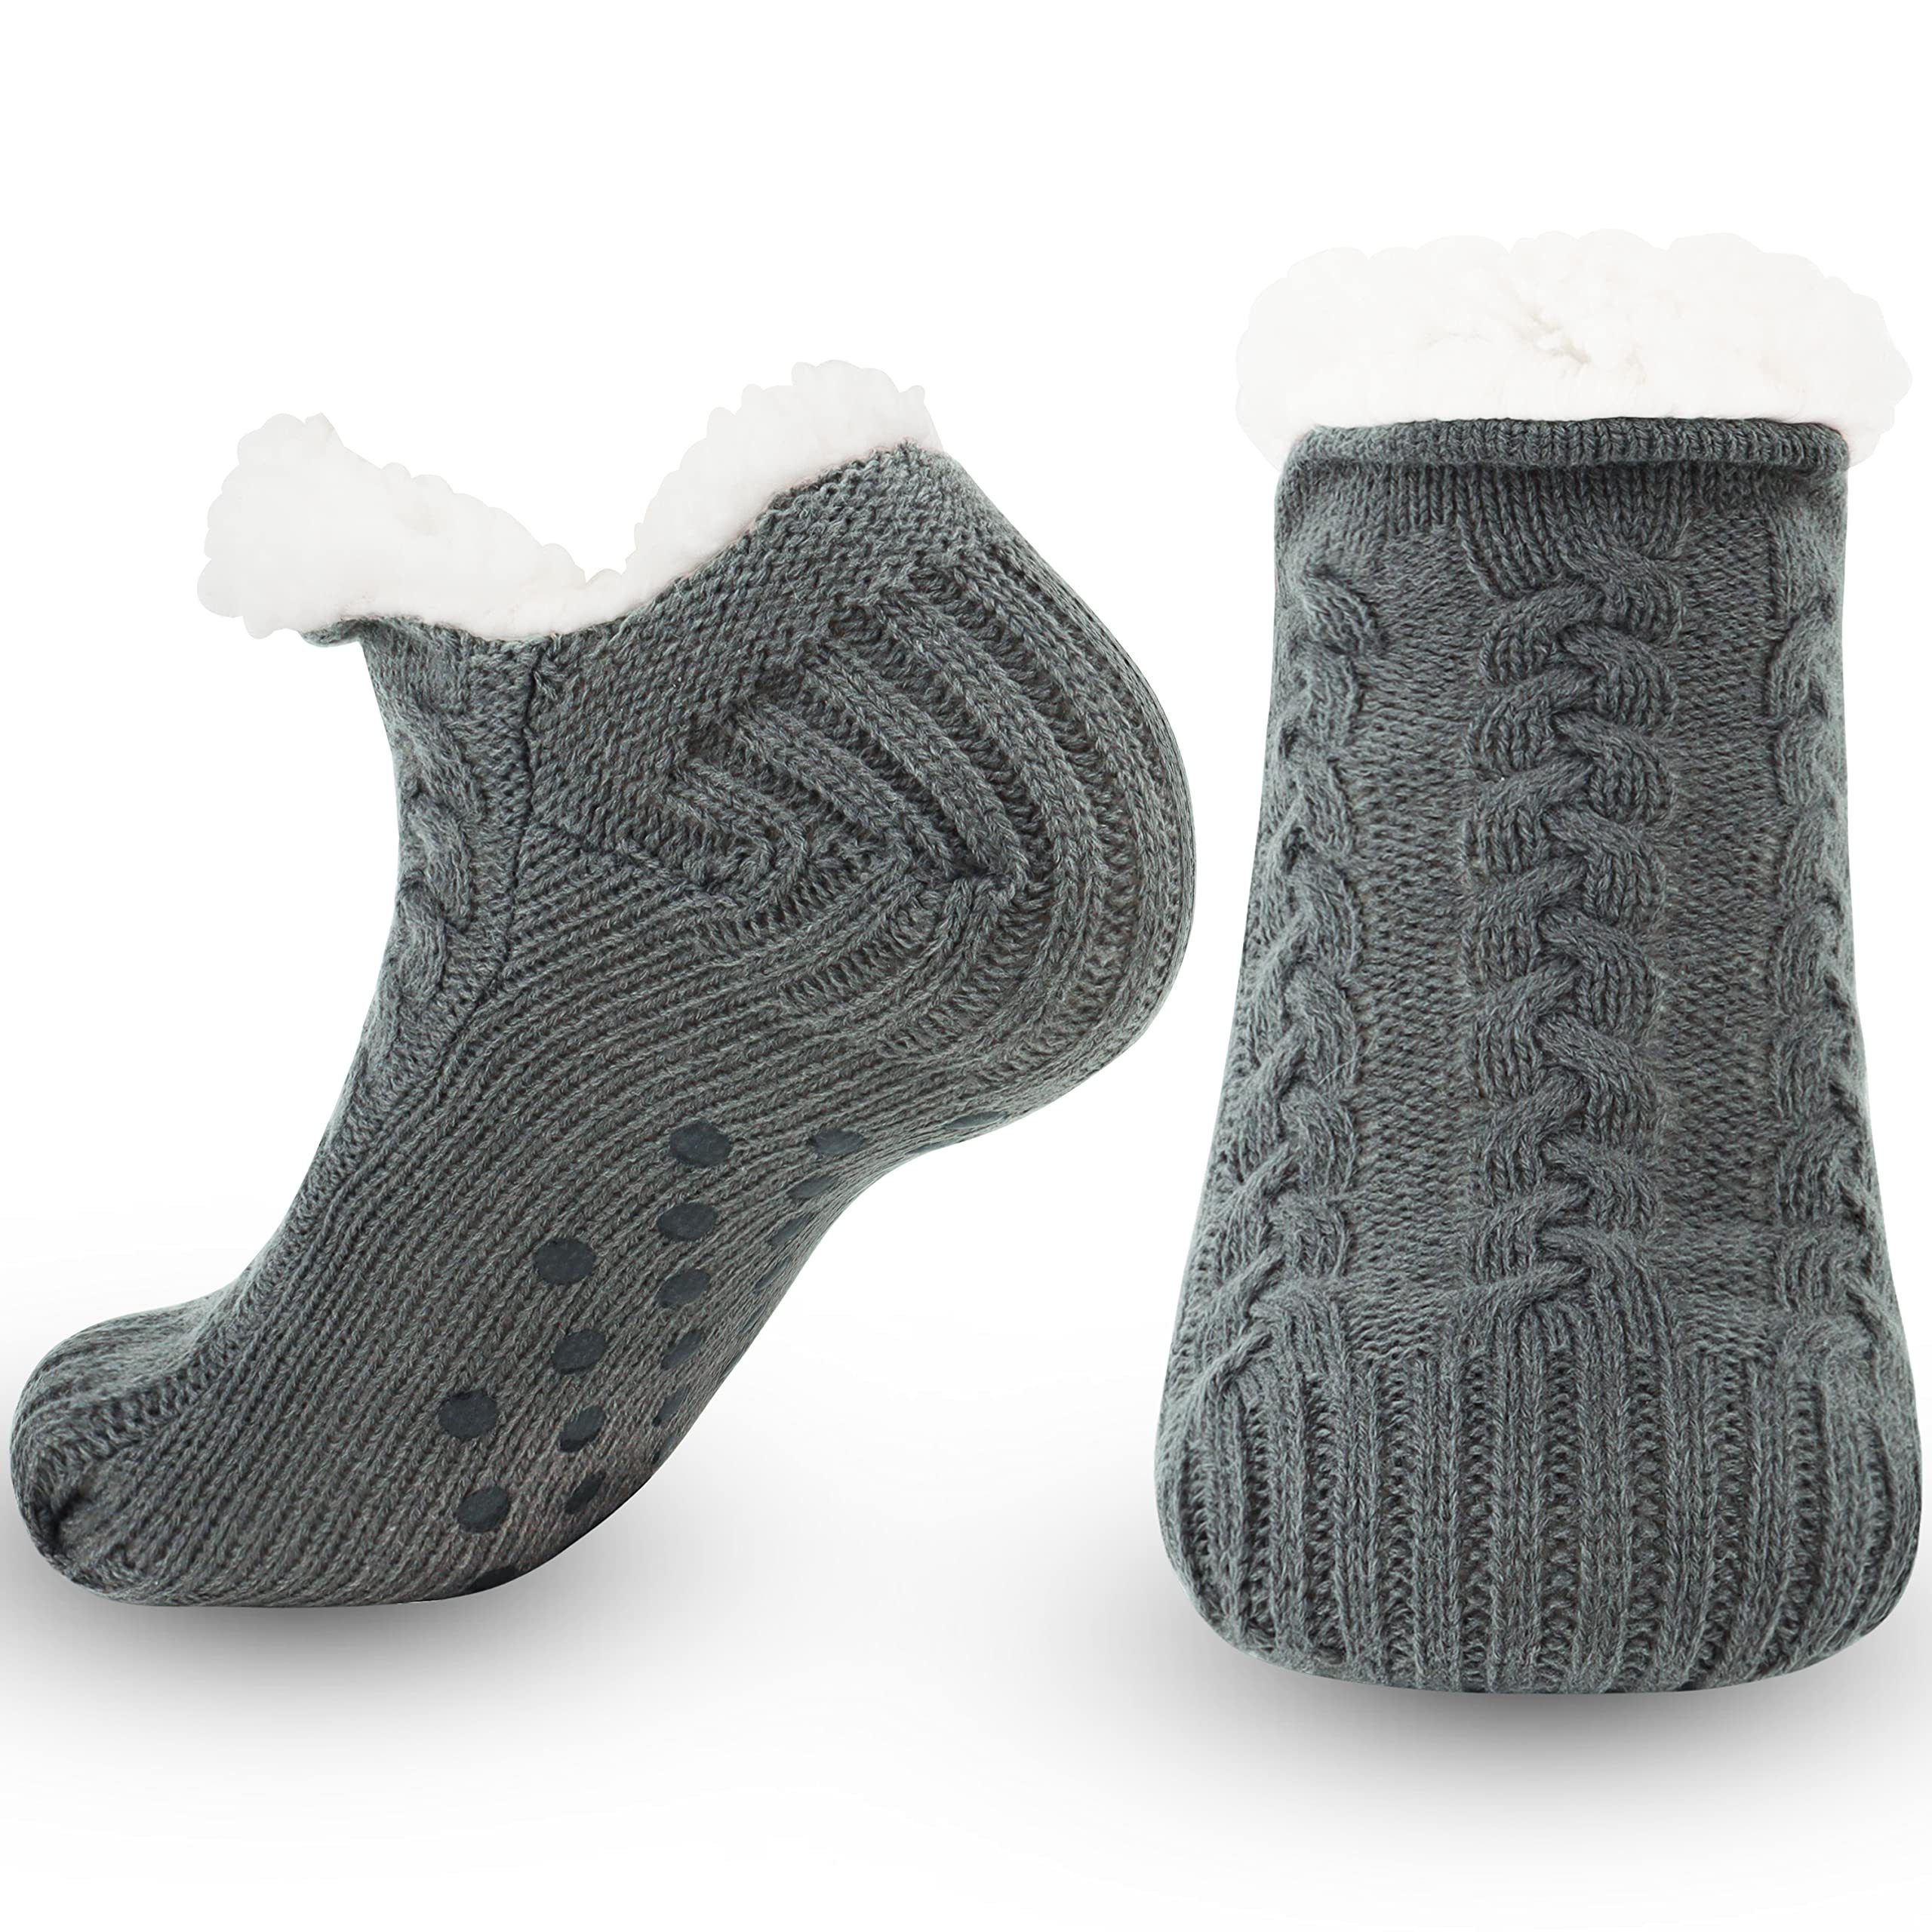 Lágfótur knitted Nordic slippers | Icemart